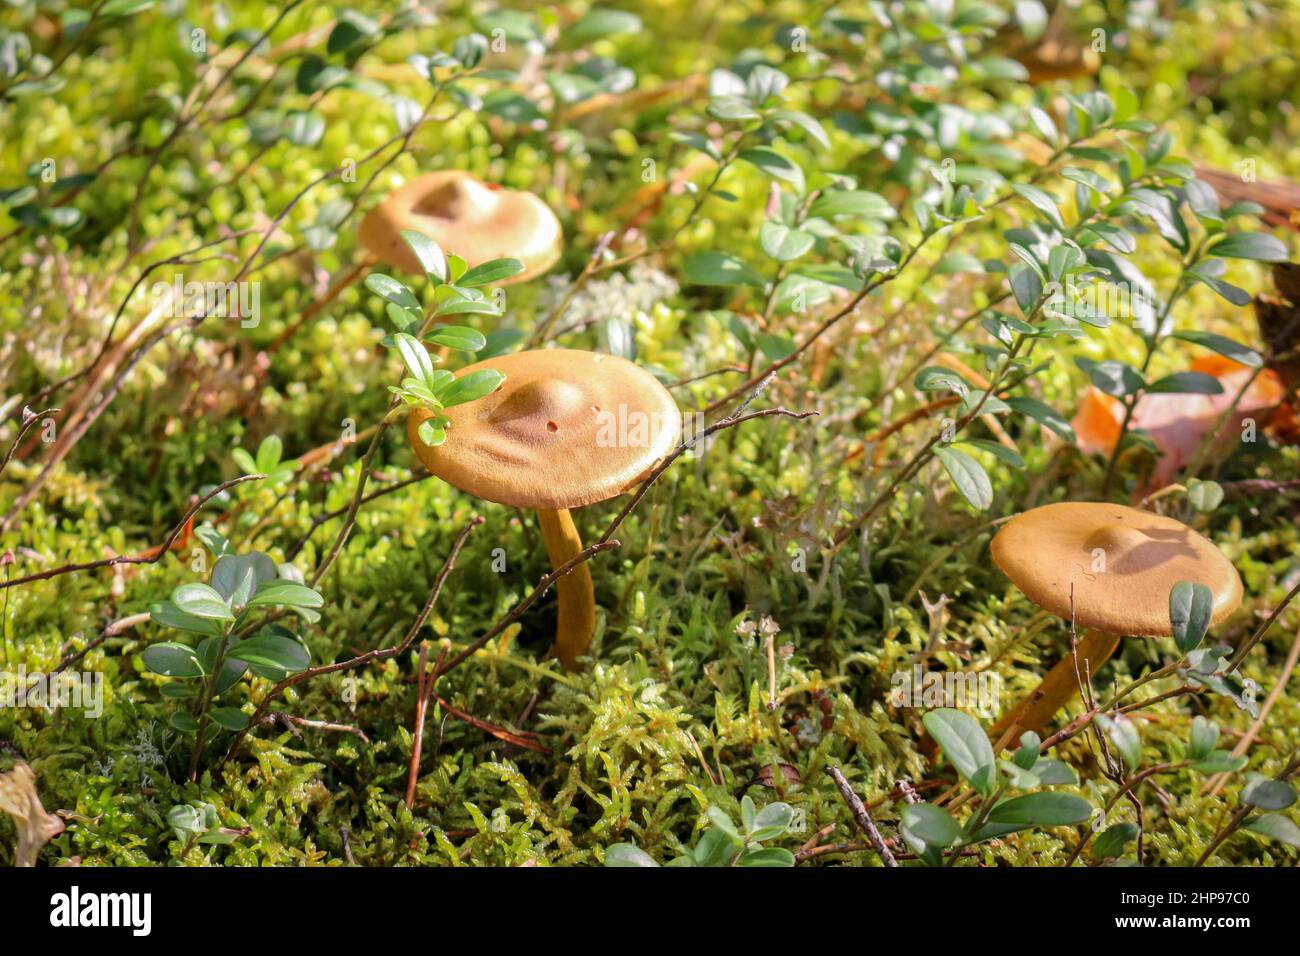 Wild brown mushrooms in a wet autumn coniferous forest. Stock Photo